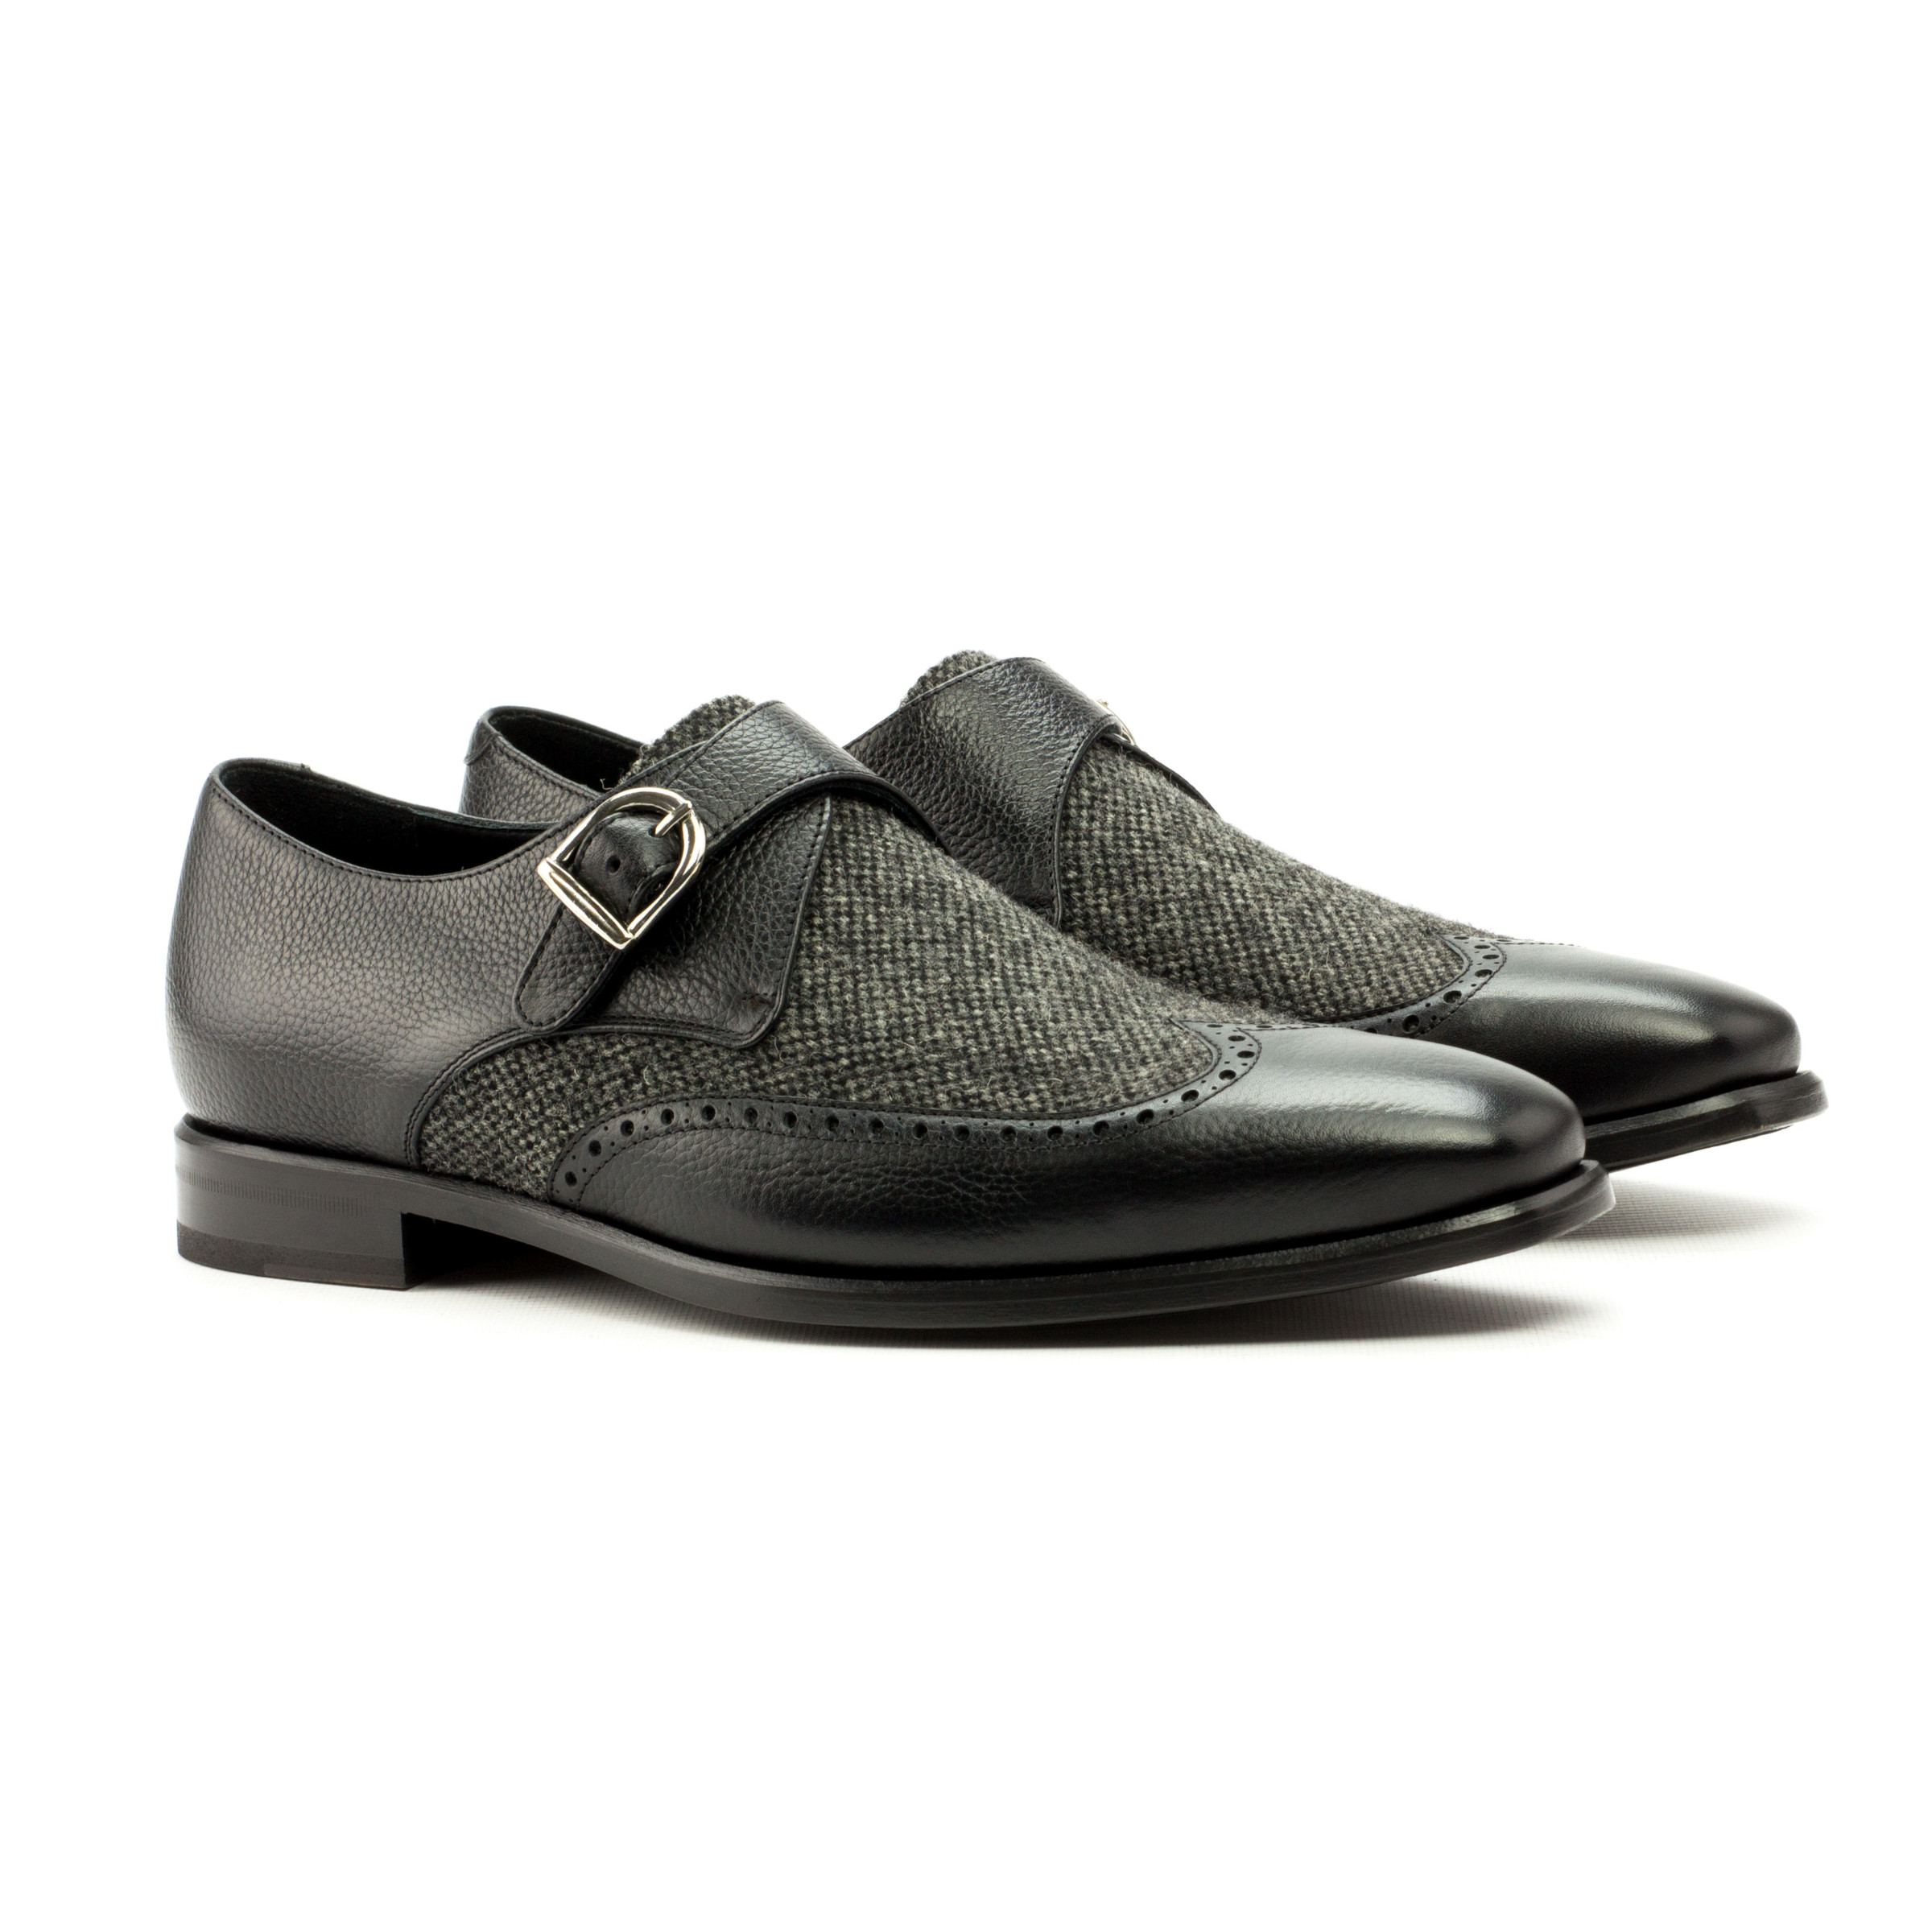 The Abbot: Black Calf/Nailhead. front side view of Nailhead Sartorial, black painted full grain leather single strap monk style shoes on a white background